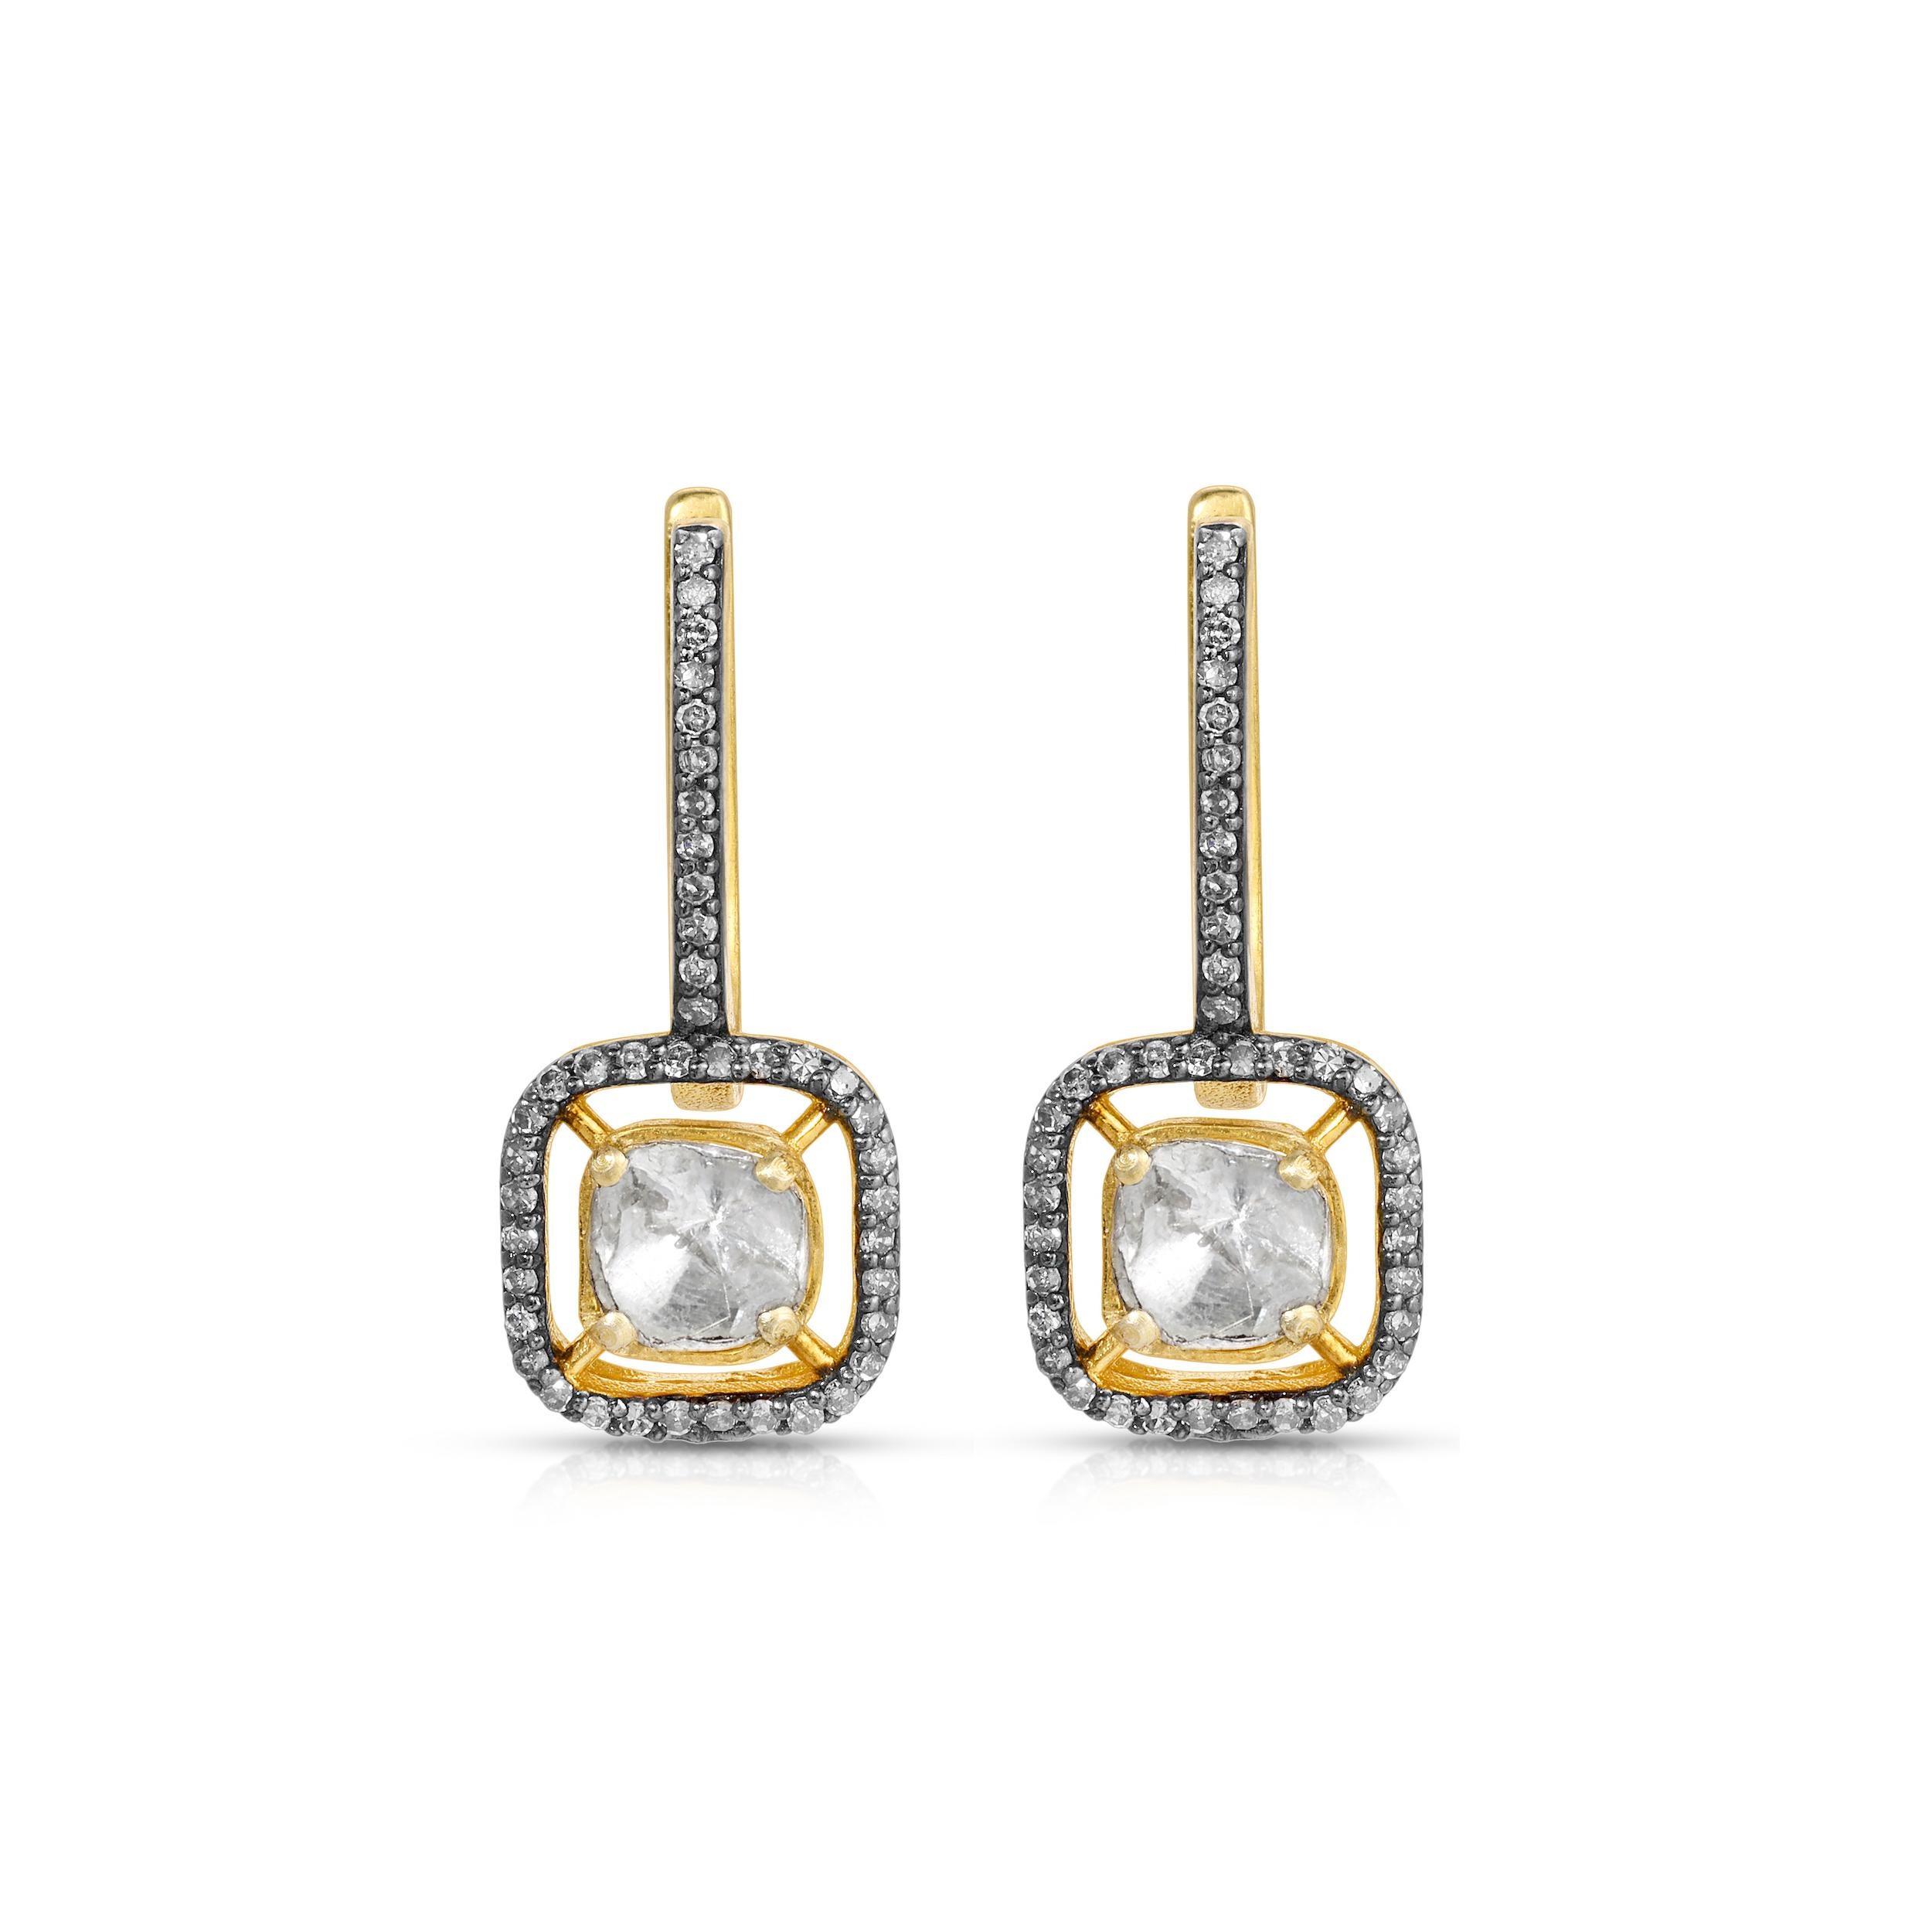 Stunning drop earrings featuring a mix of diamonds. These earrings feature fine quality Polki Diamonds in a floating Diamond set blackened bezel setting suspended from blackened Diamond set hoops. These earrings are set in 18 Karat Gold overlay